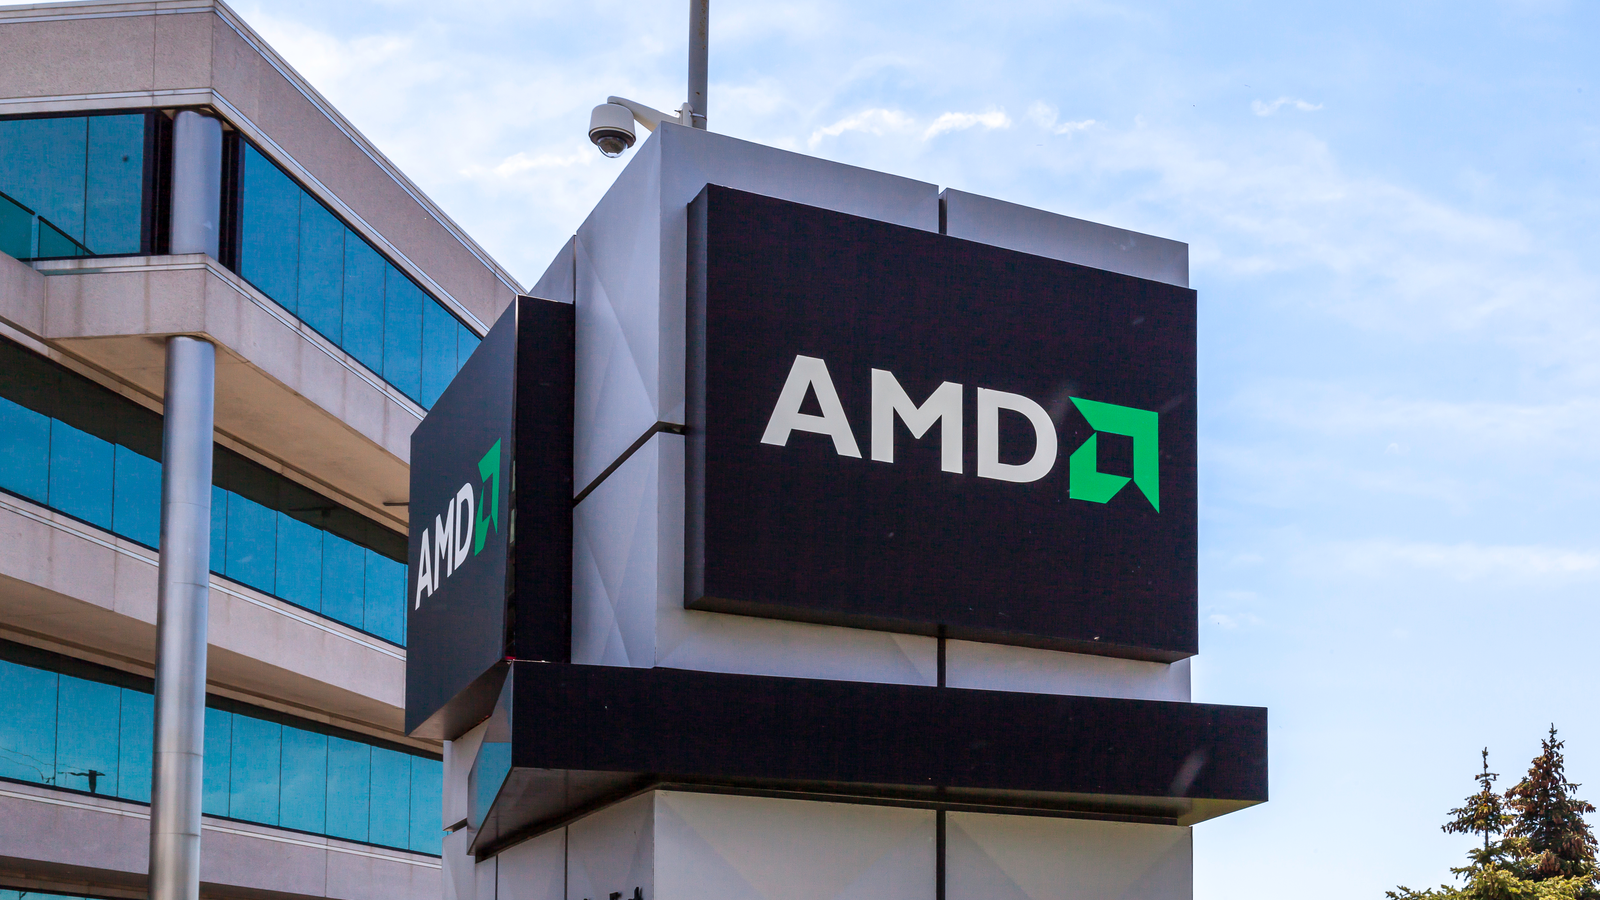 Sign of AMD office in Markham, Ontario, Canada. Advanced Micro Devices, Inc. (AMD stock) is an American multinational semiconductor company.